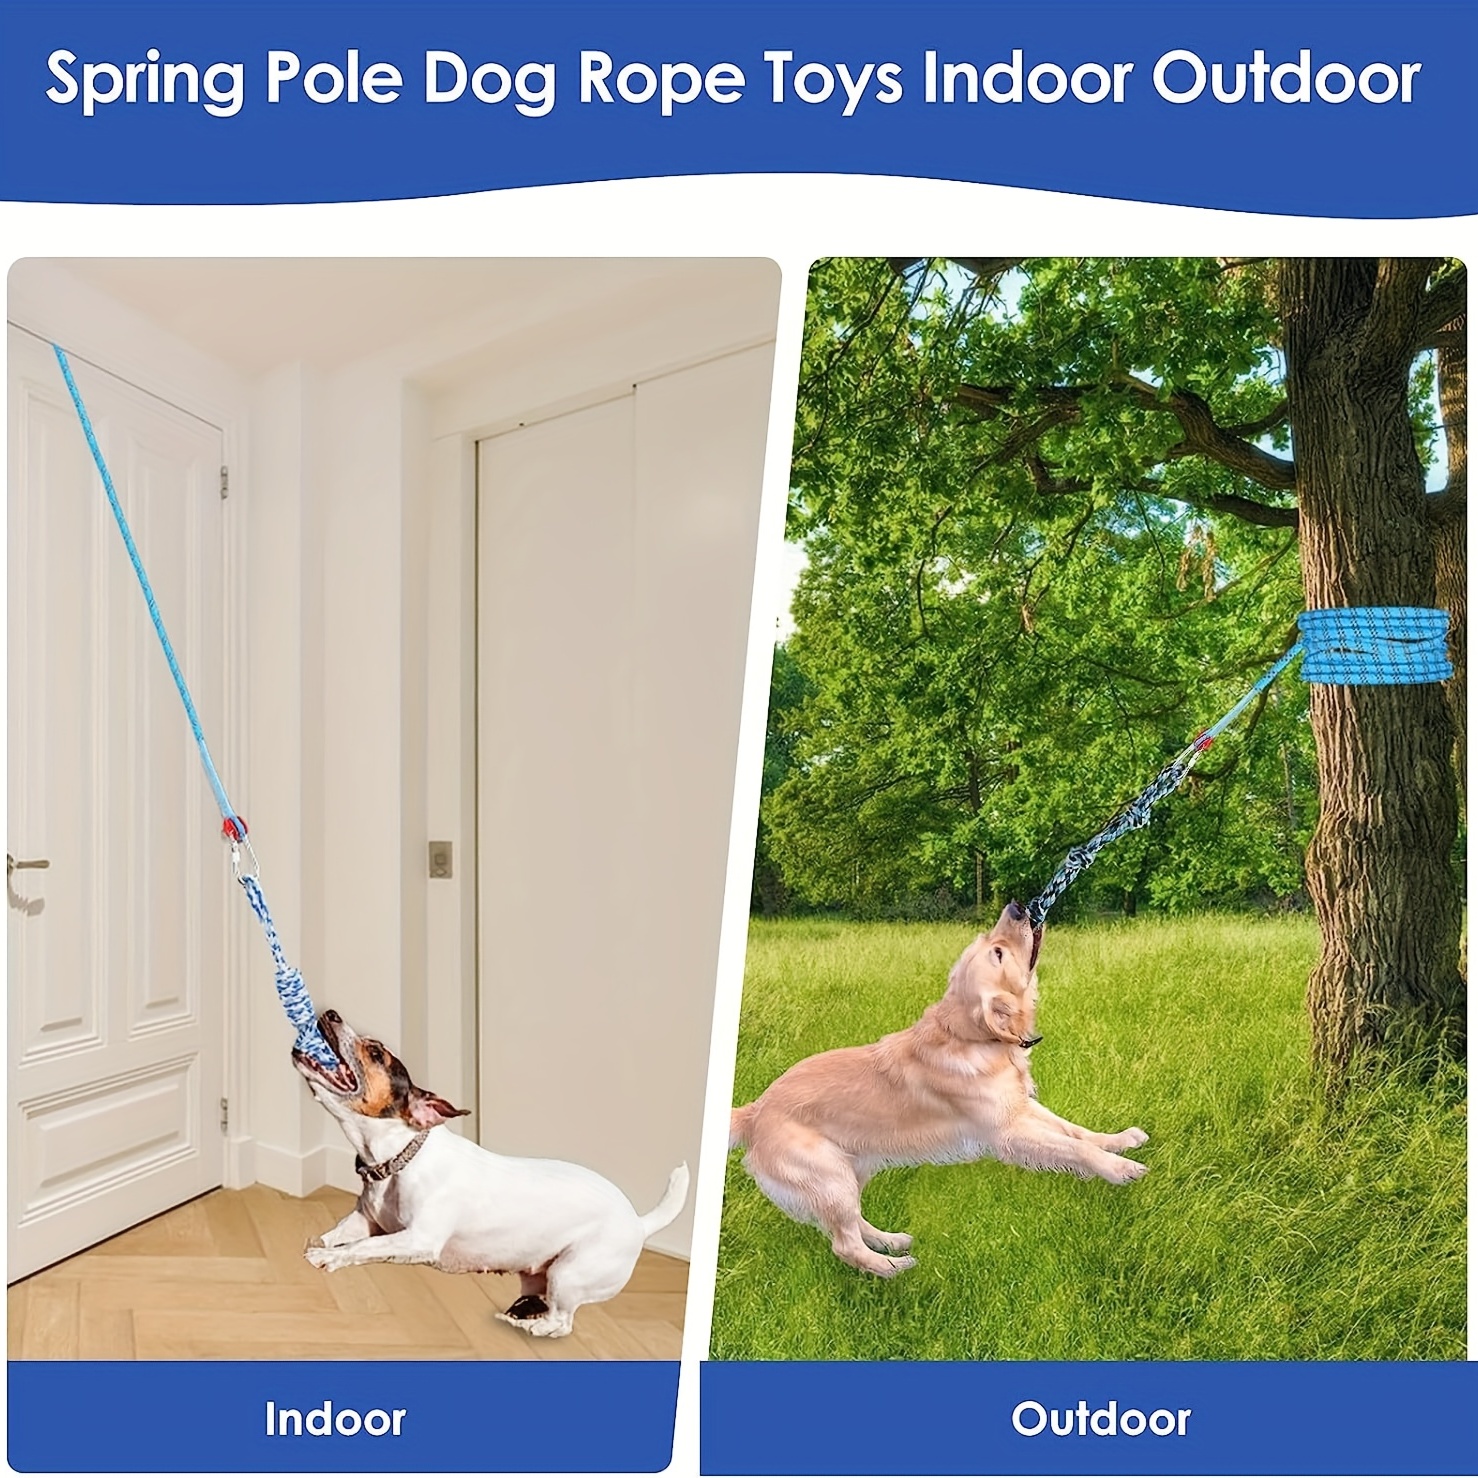 Spring Pole Dog Rope Toys, Tree Bungee Hanging Dog Toys, Indoor Outdoor Dog  Bungee Tug Interactive Exercise Toys, Pull & Tug Of War Dog Toy With Chewe